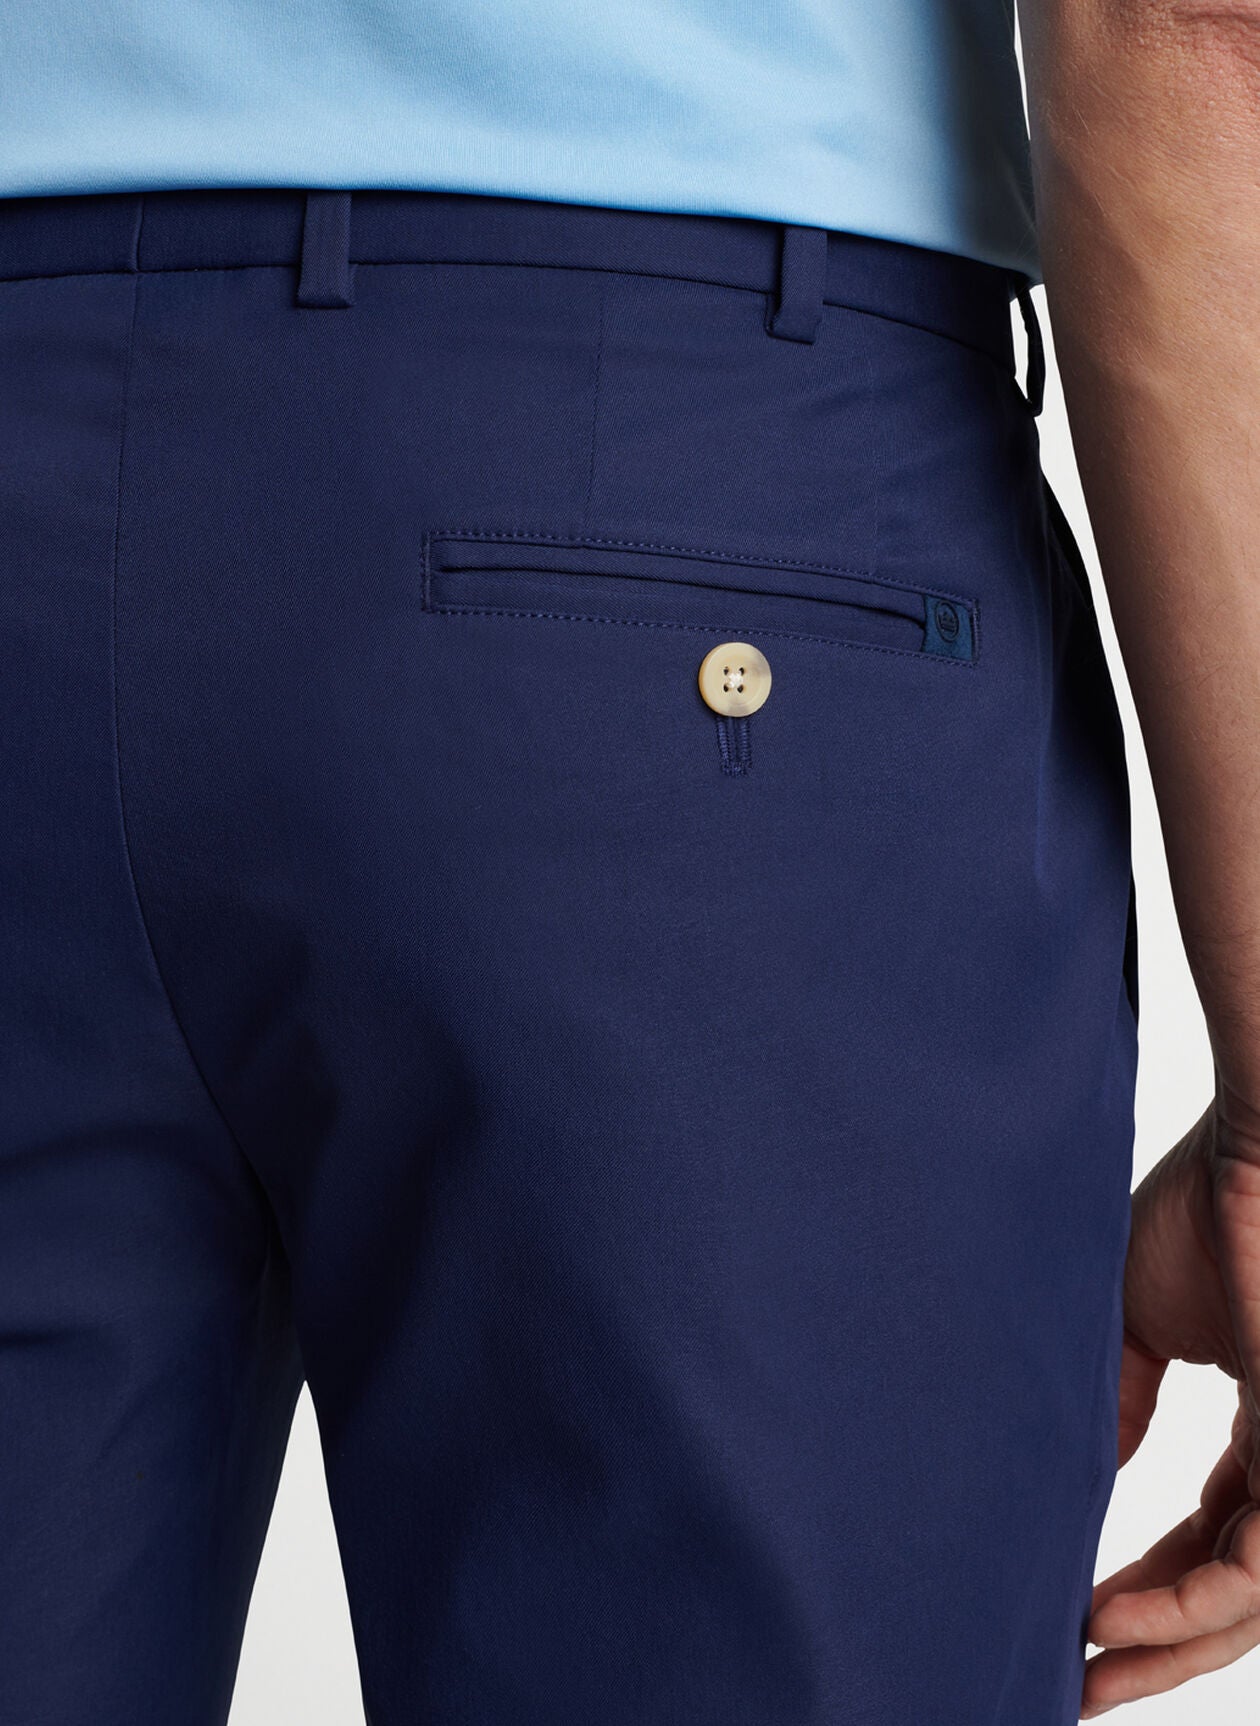 Raleigh Performance Trouser